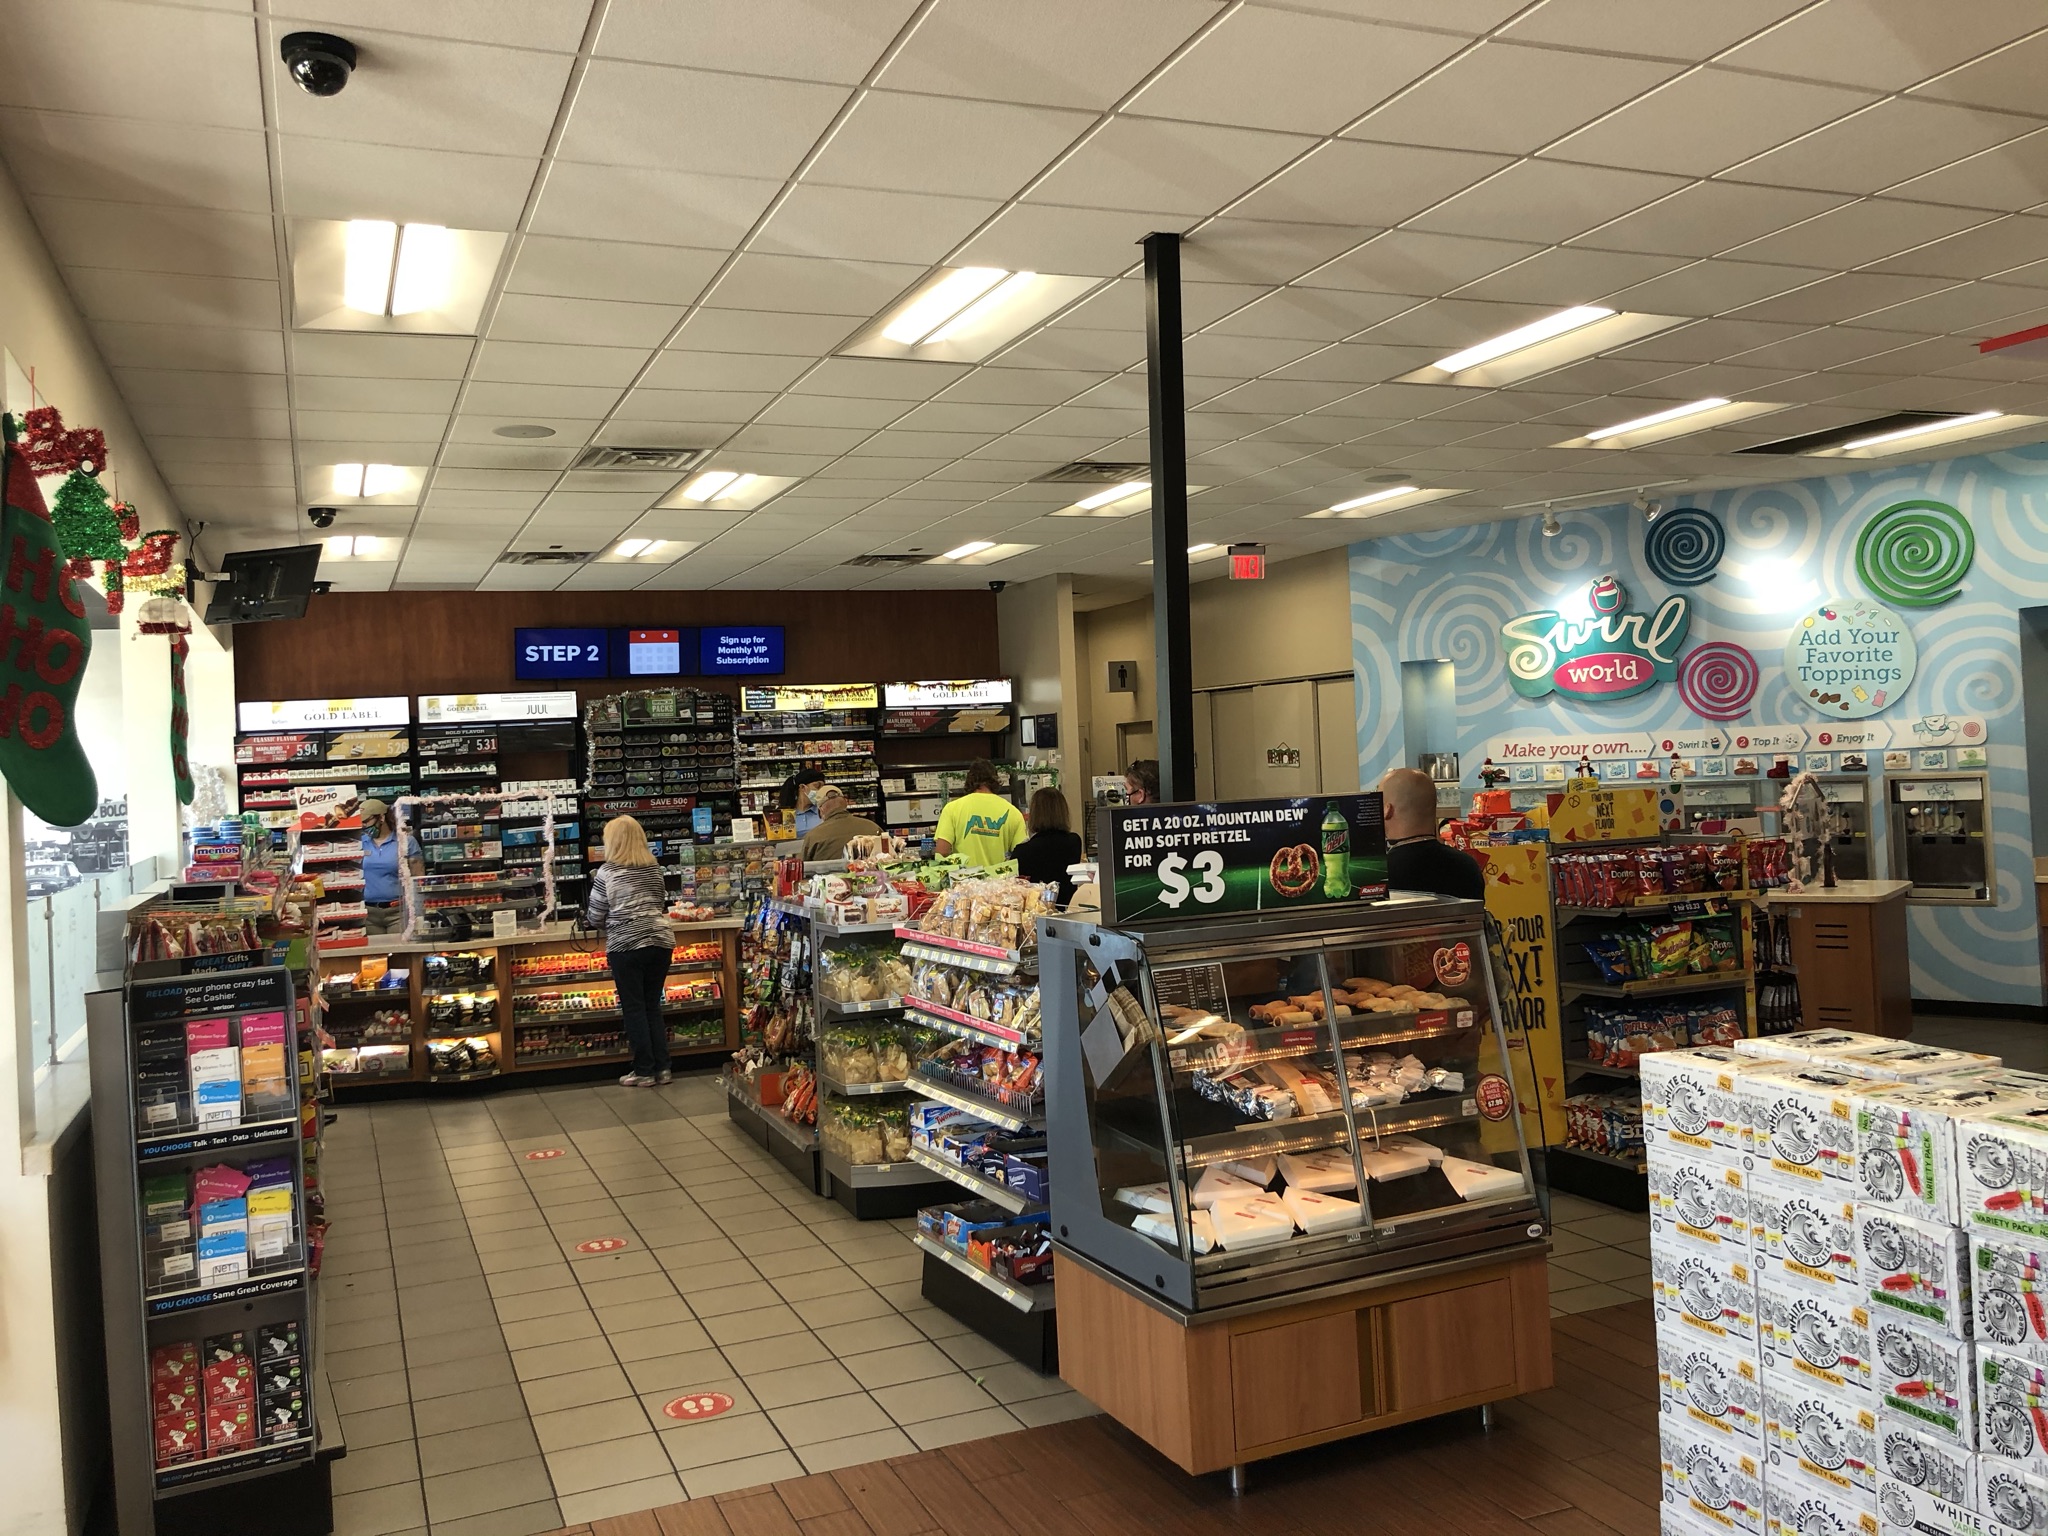 Available property at Interior of RaceTrac